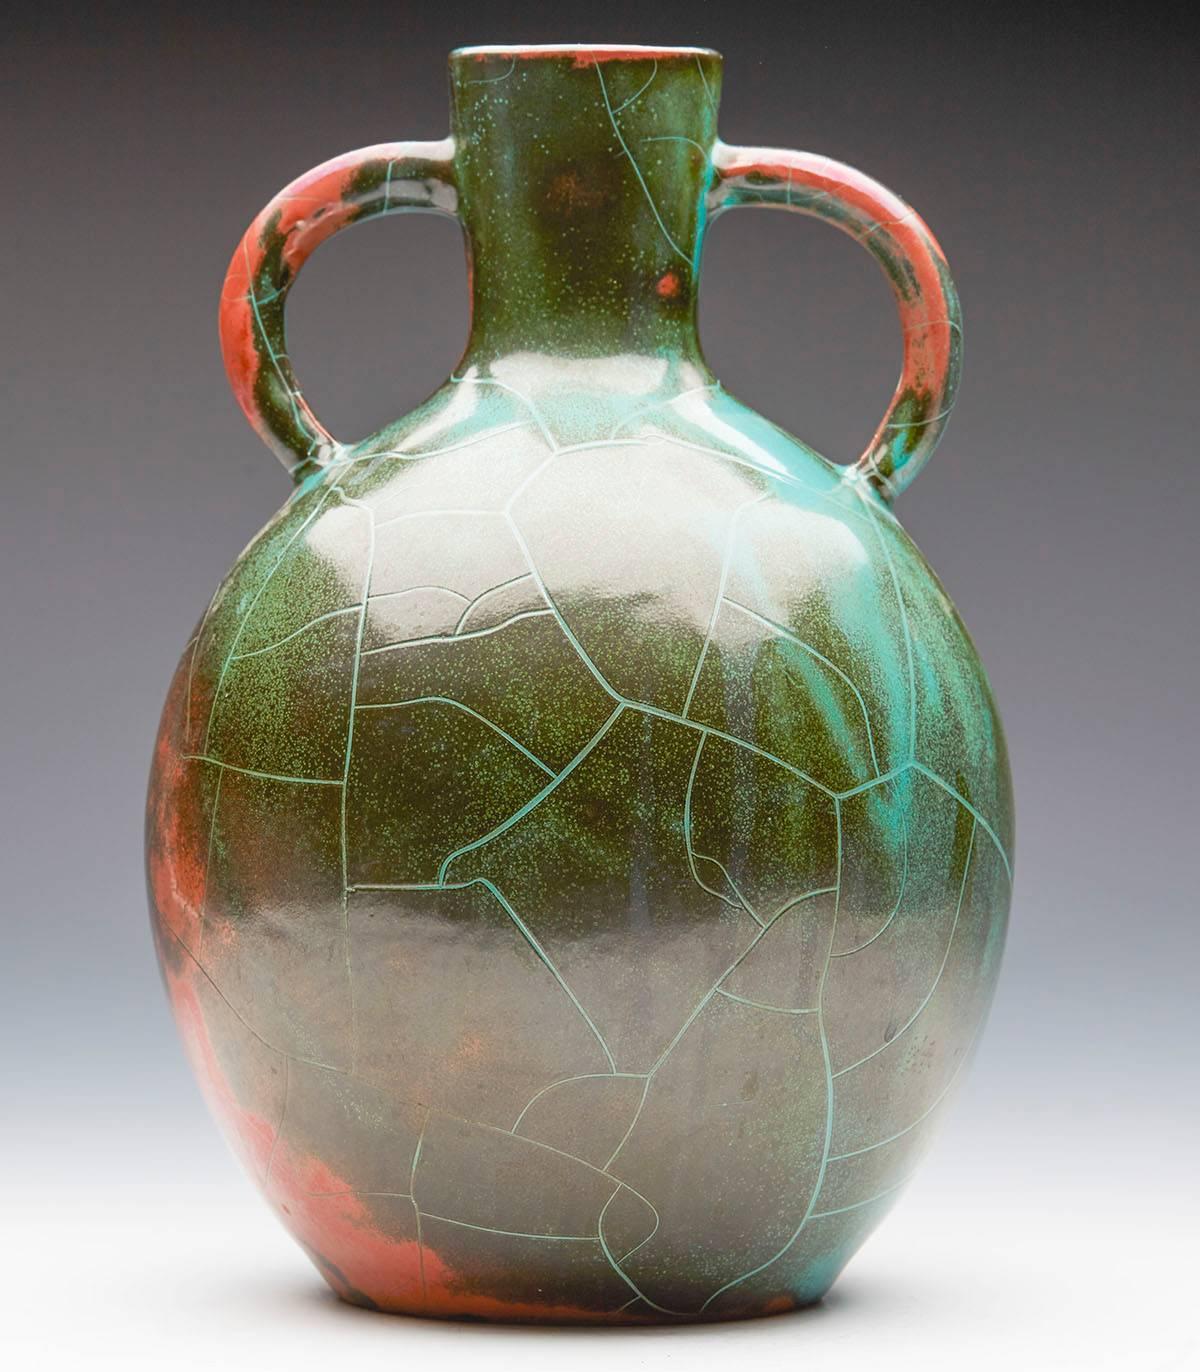 A large Art Deco German art pottery vase by Paul Dresler made at the Grootenburg studio. This stylish twin handled earthenware vase is of rounded bulbous shape and decorated Dresler's Classic copper reduction glaze in tones of red and green with